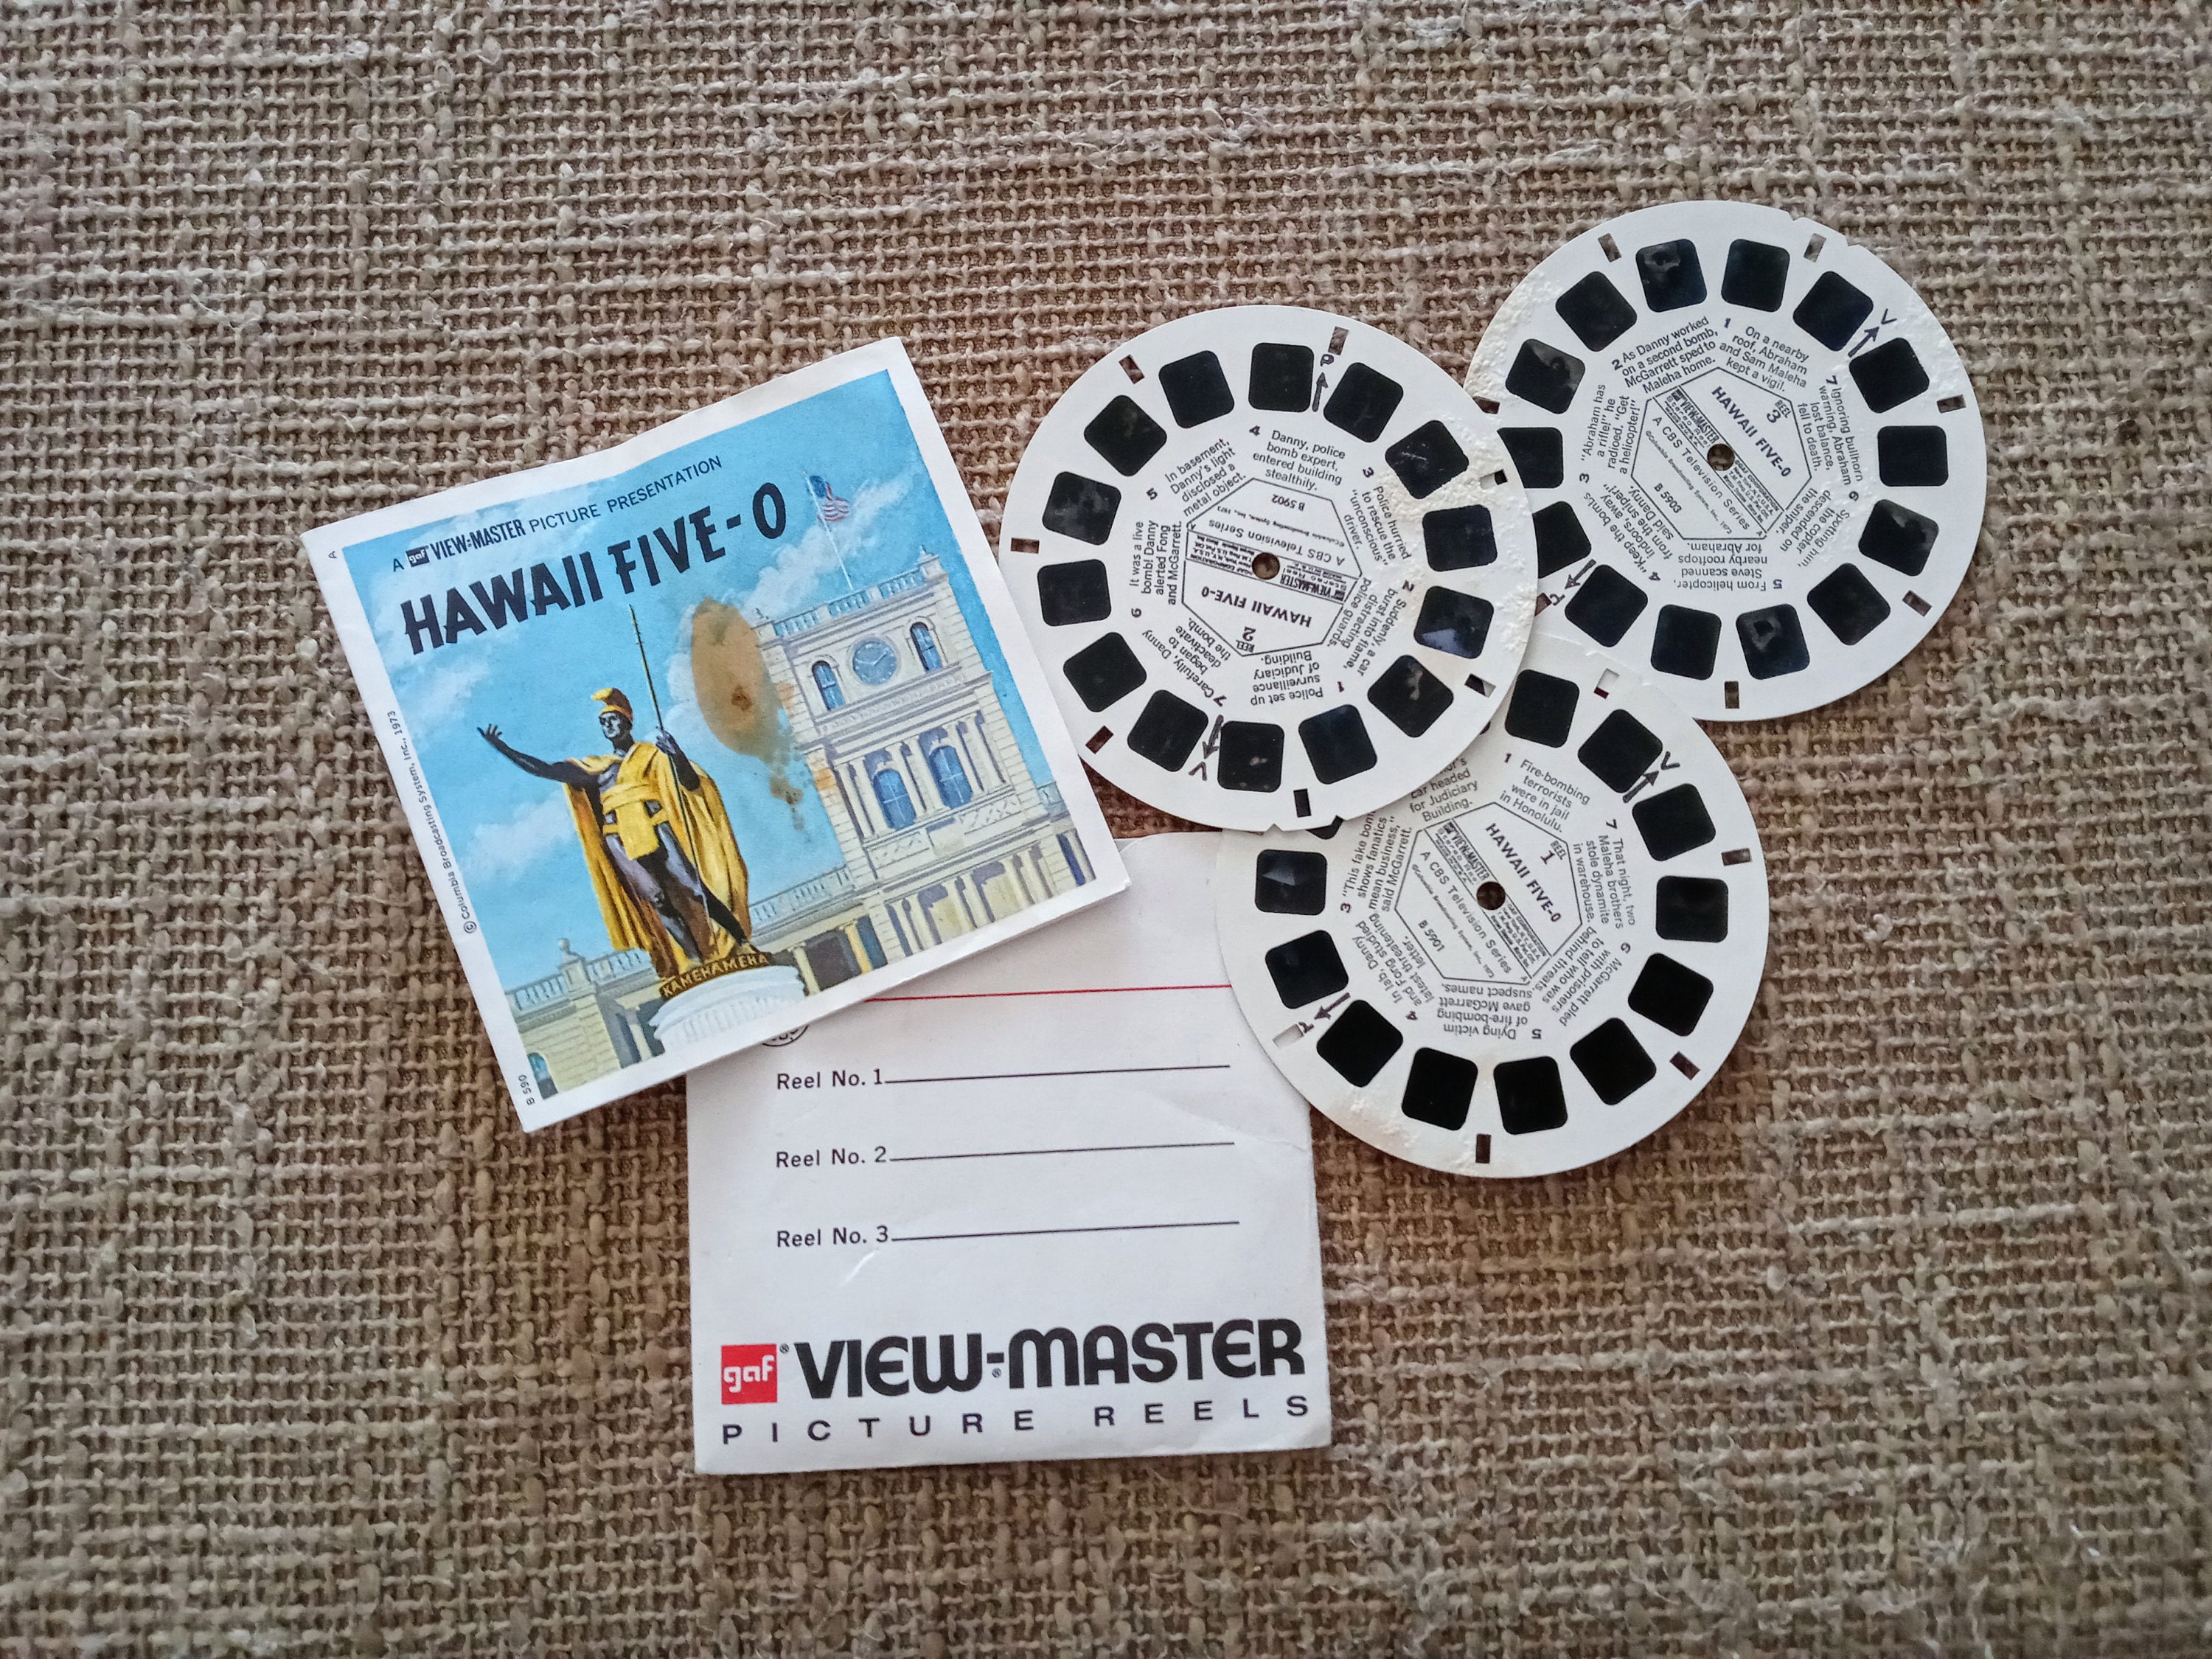 View-Master history and value - Antique Trader